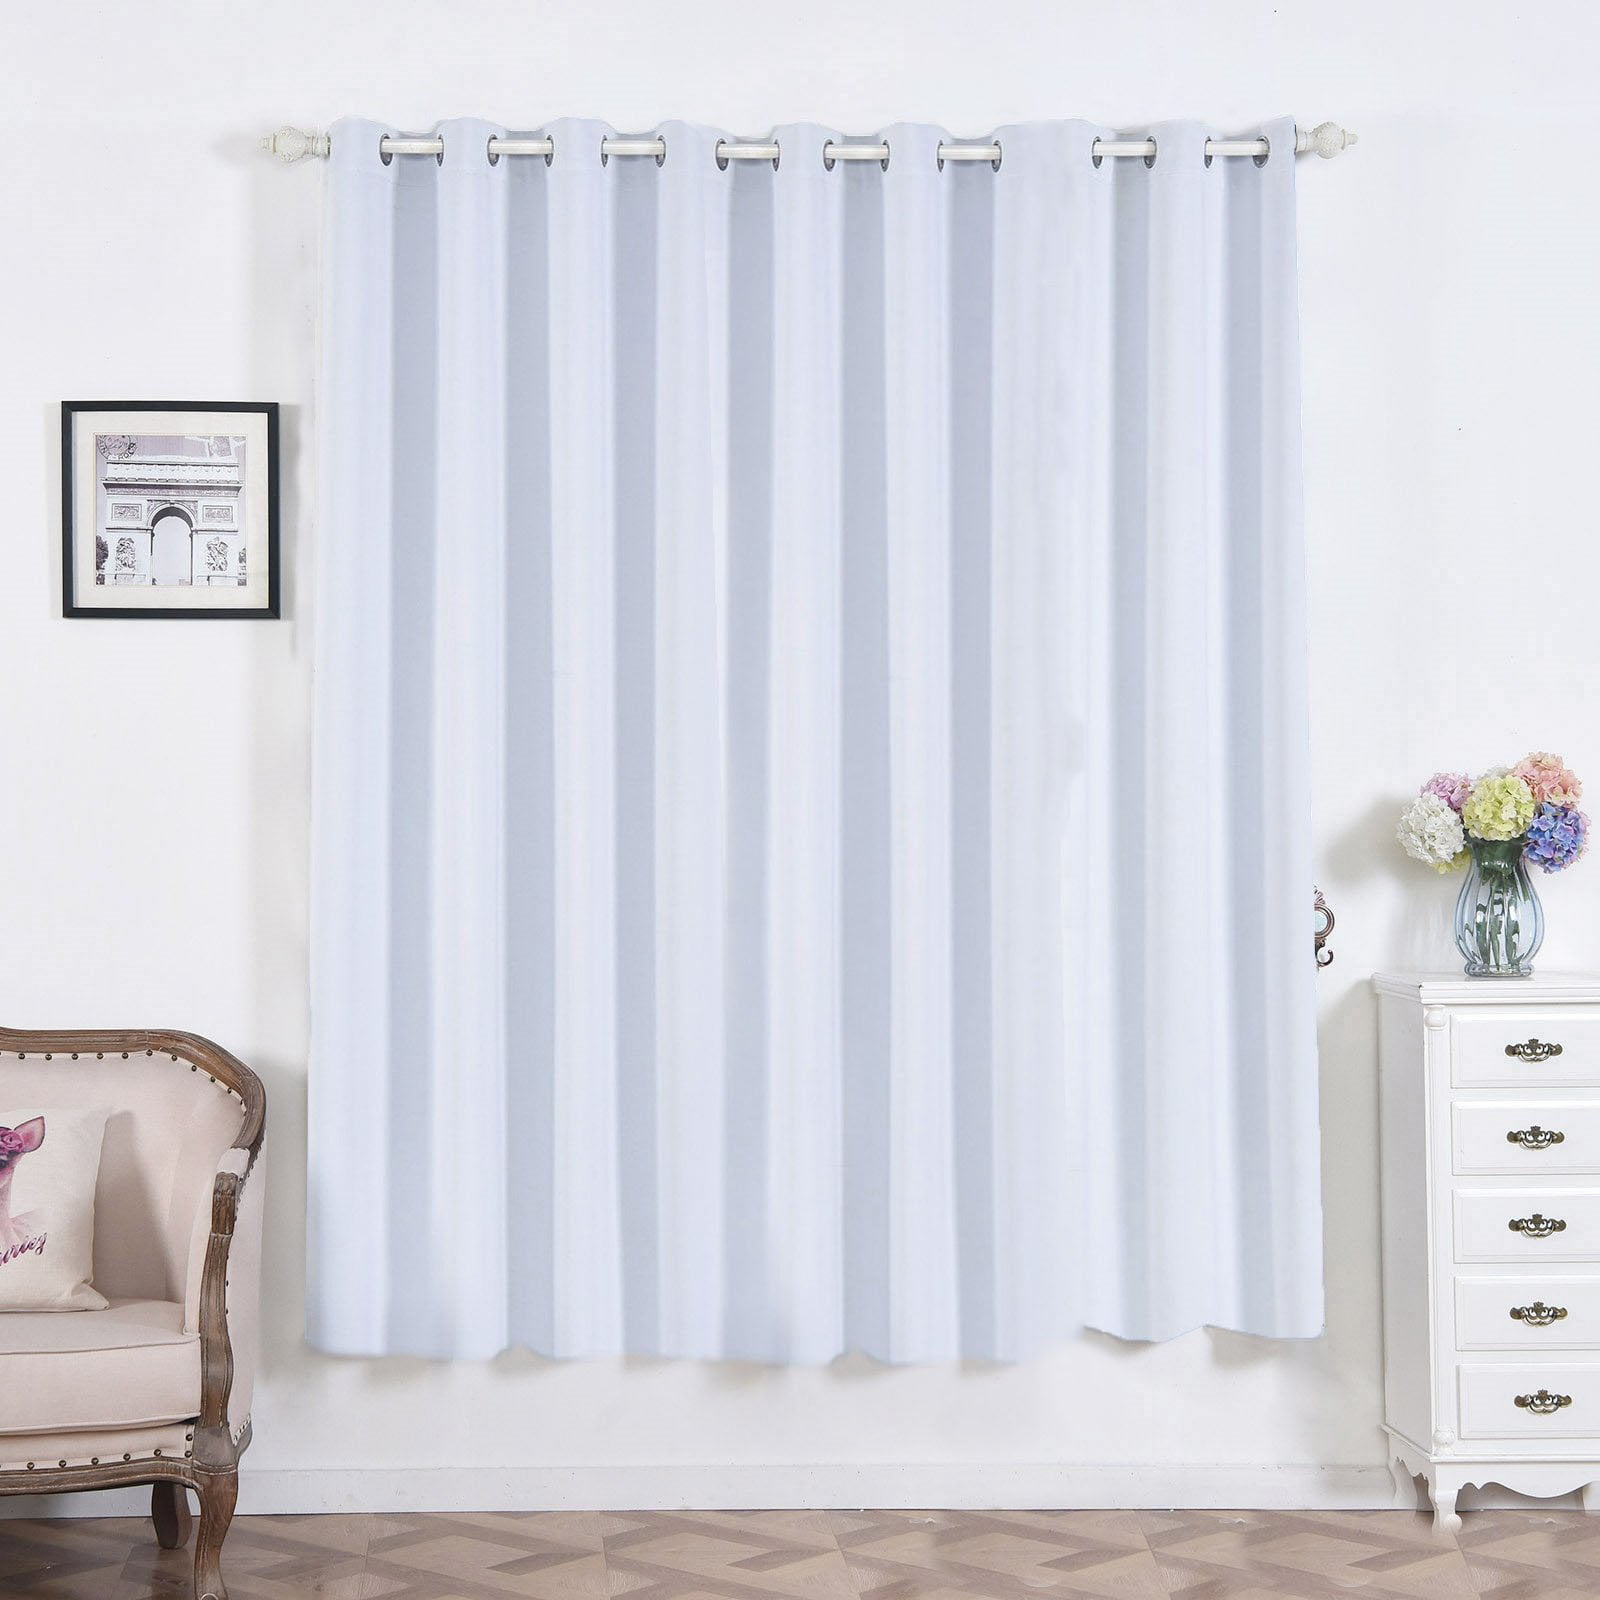 White Soundproof Curtains | 2 Packs | 52 x 84 Inch Grommet Curtains